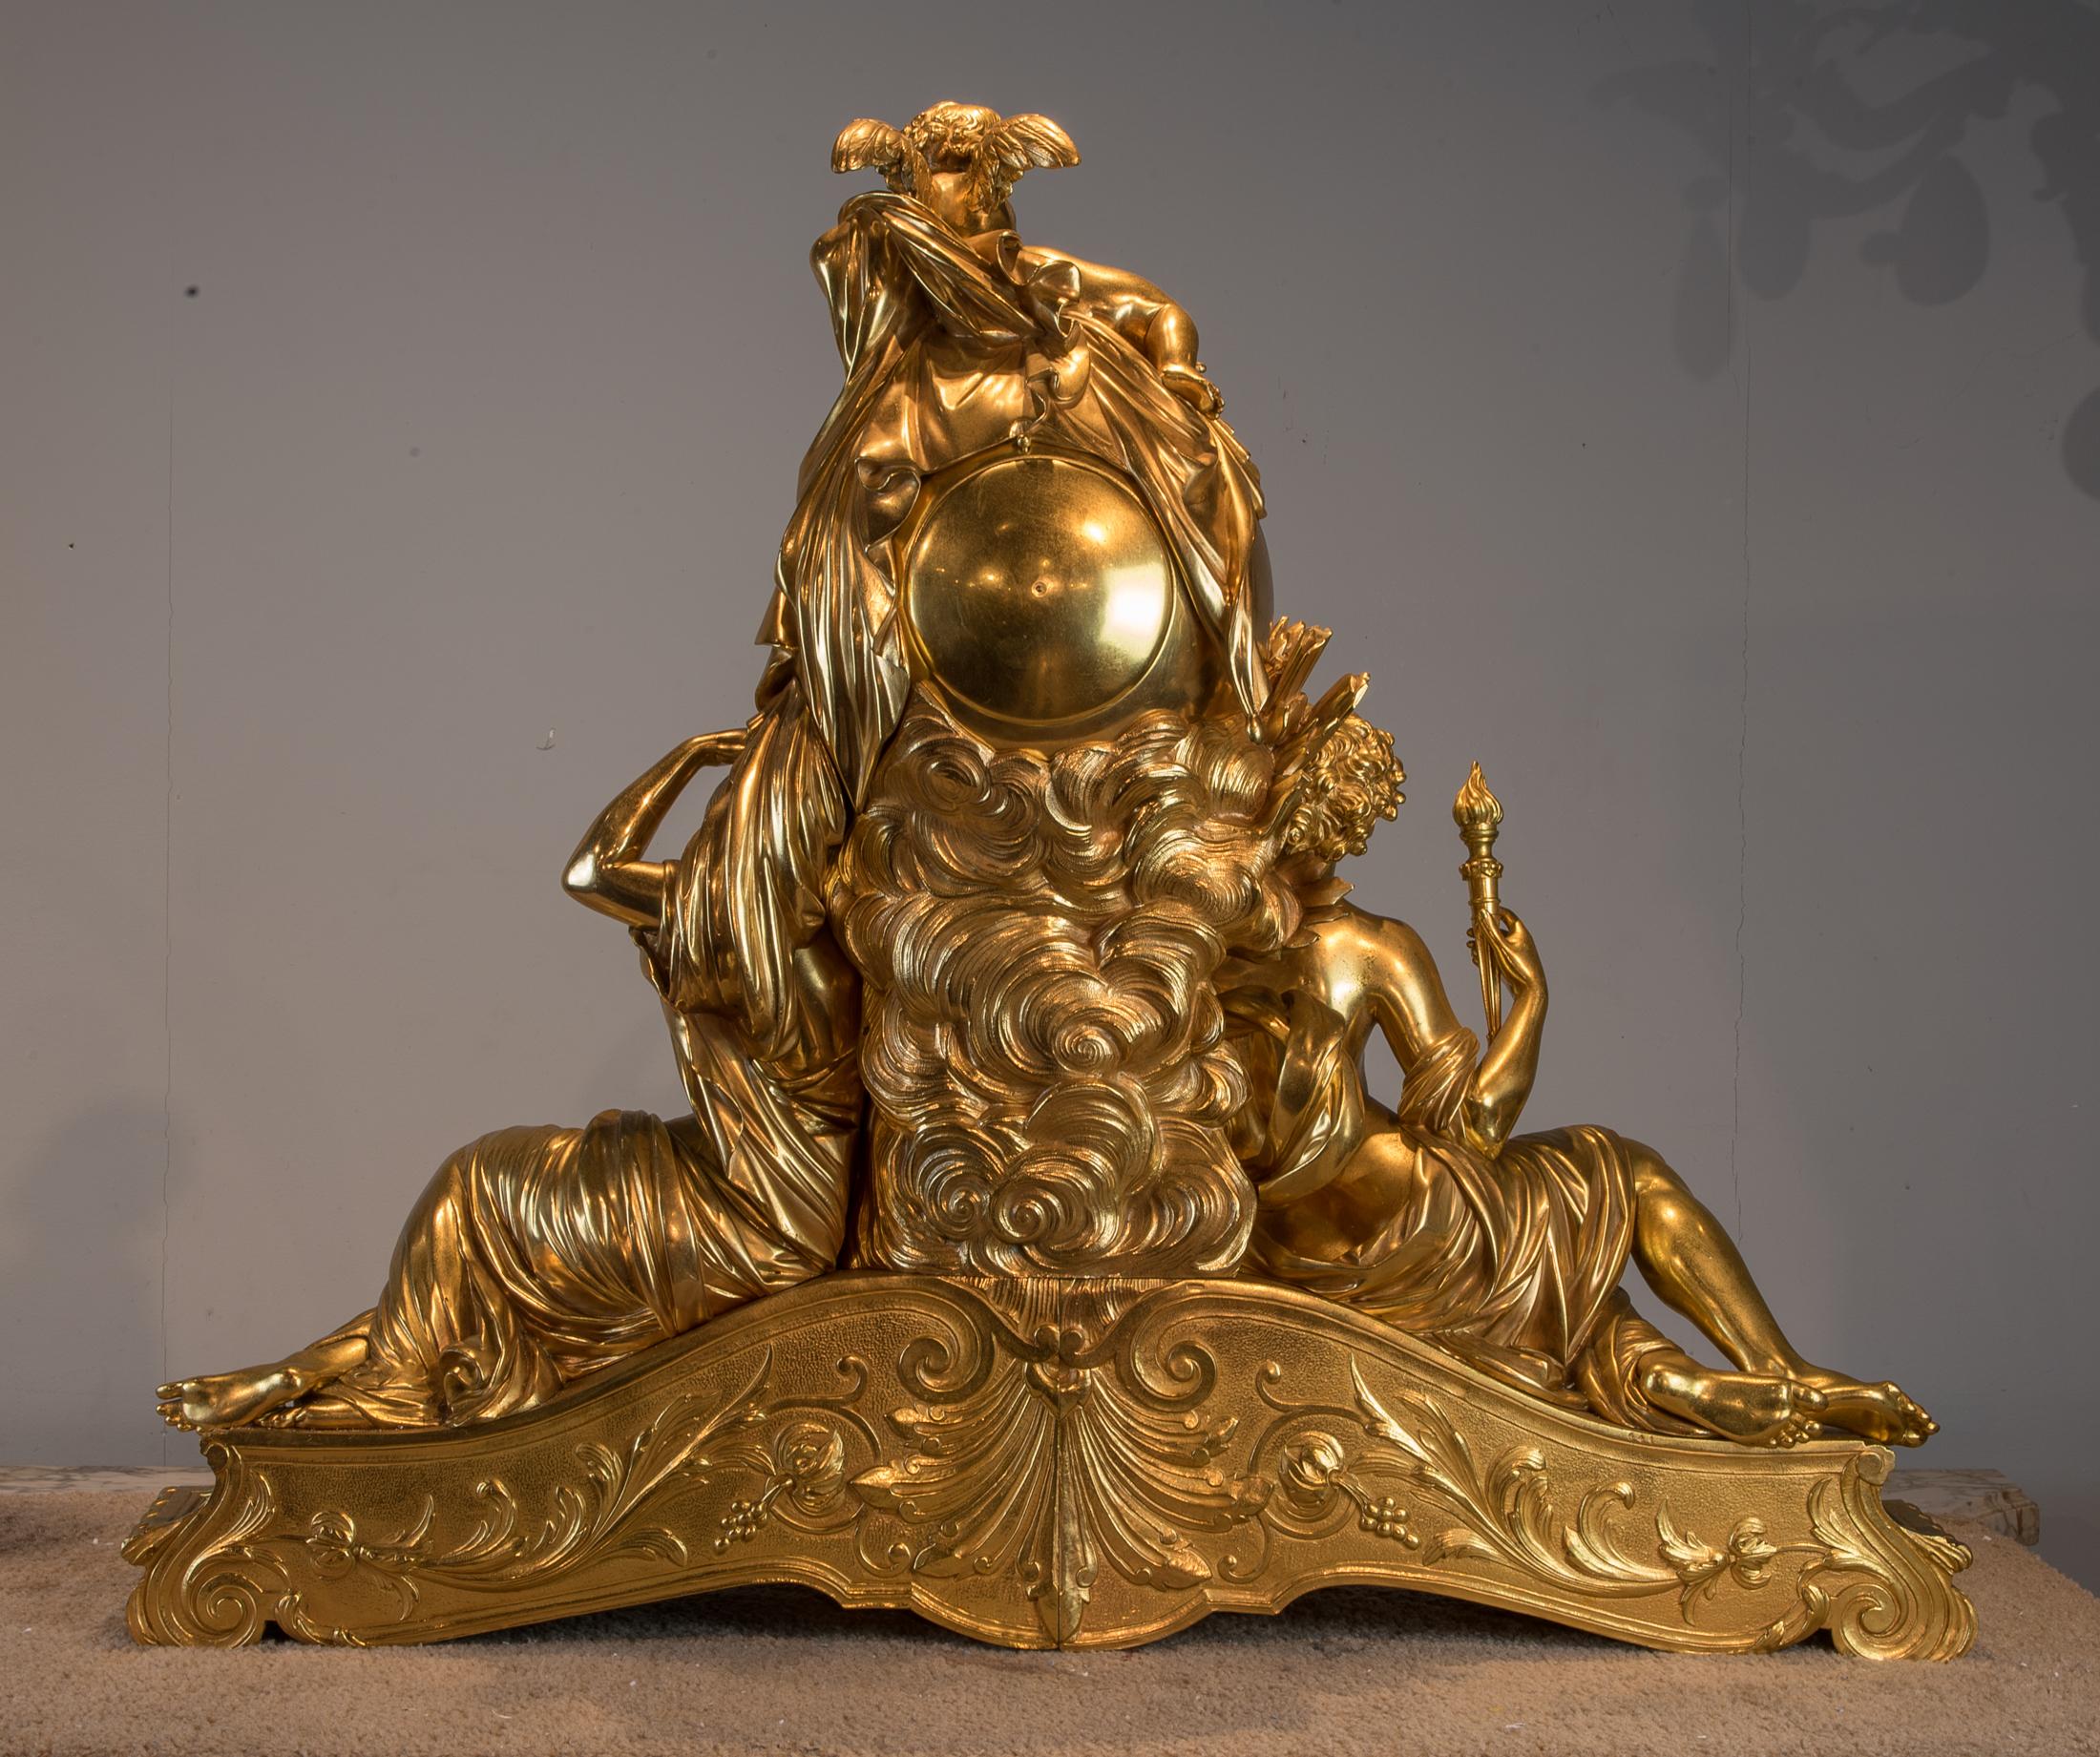 Gilt Fine Quality Napoleon III Style Ormolu Figural Mantel Clock with a Putto For Sale